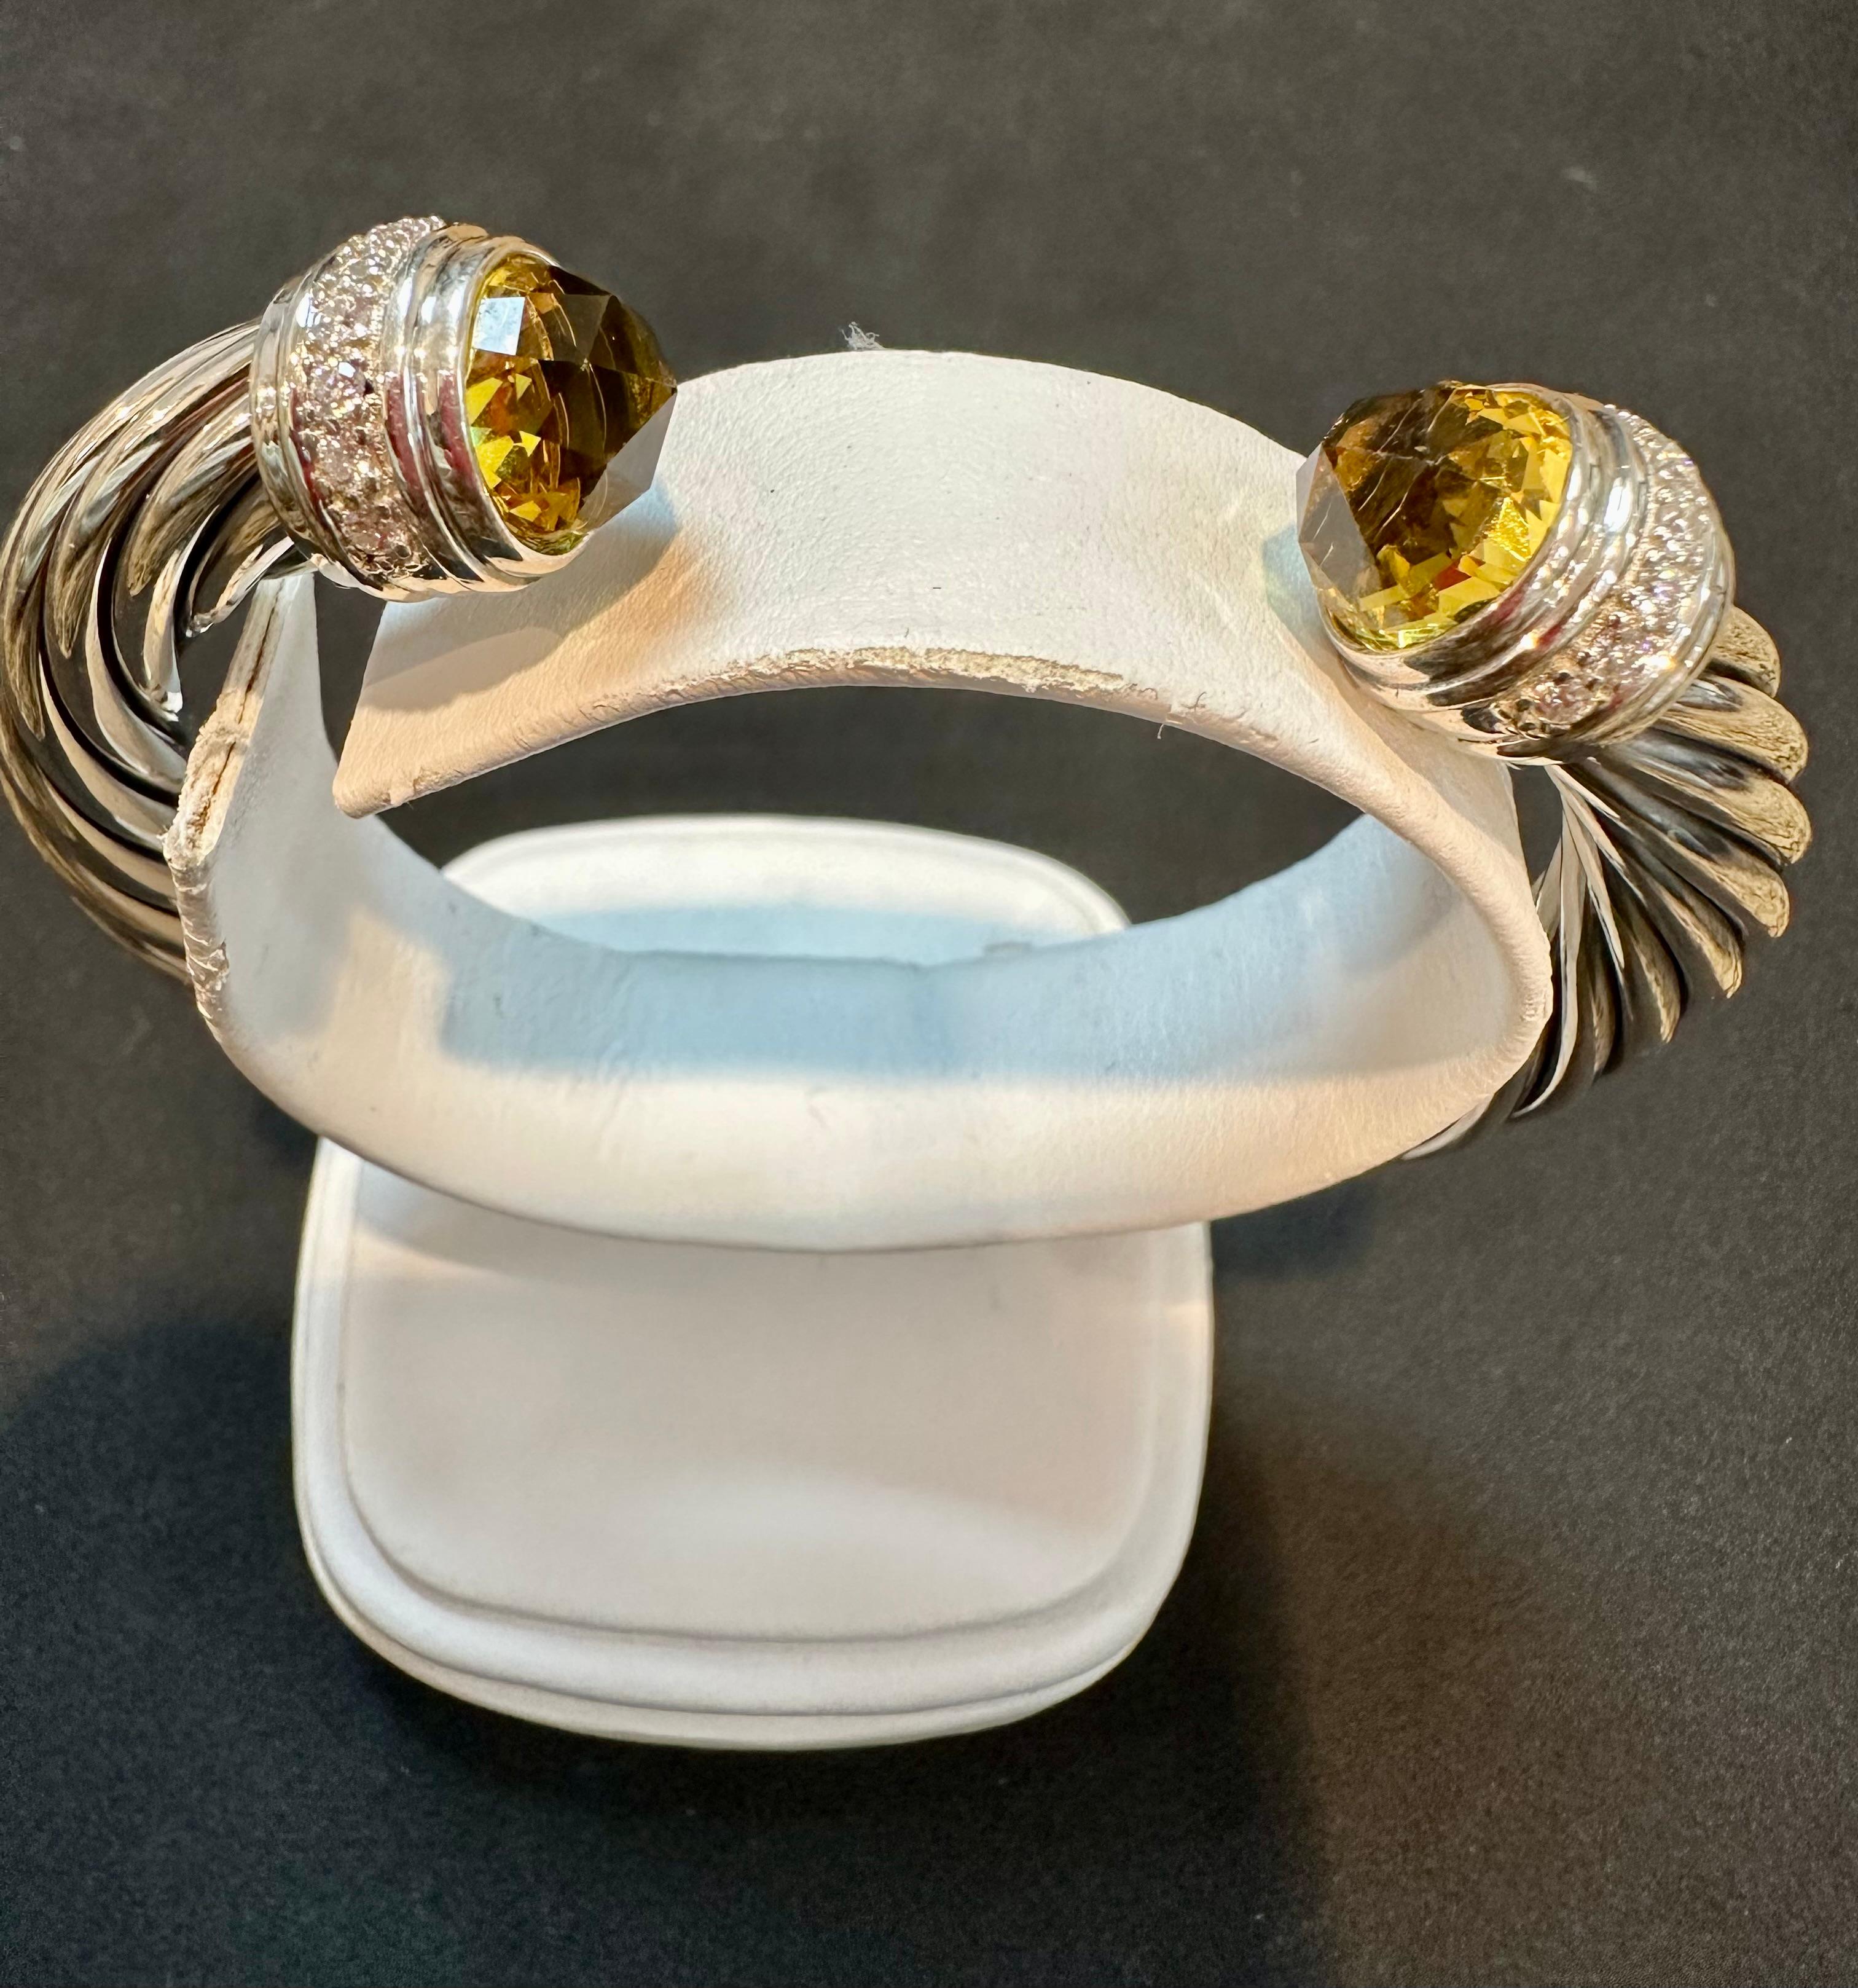 This pre-owned bangle is a beautiful piece of jewelry that showcases David Yurman's artistic signature style. Yurman's Cable design began as a bracelet that he hand-twisted from 50 feet of wire. Over the past 30 years, he has evolved the twisted